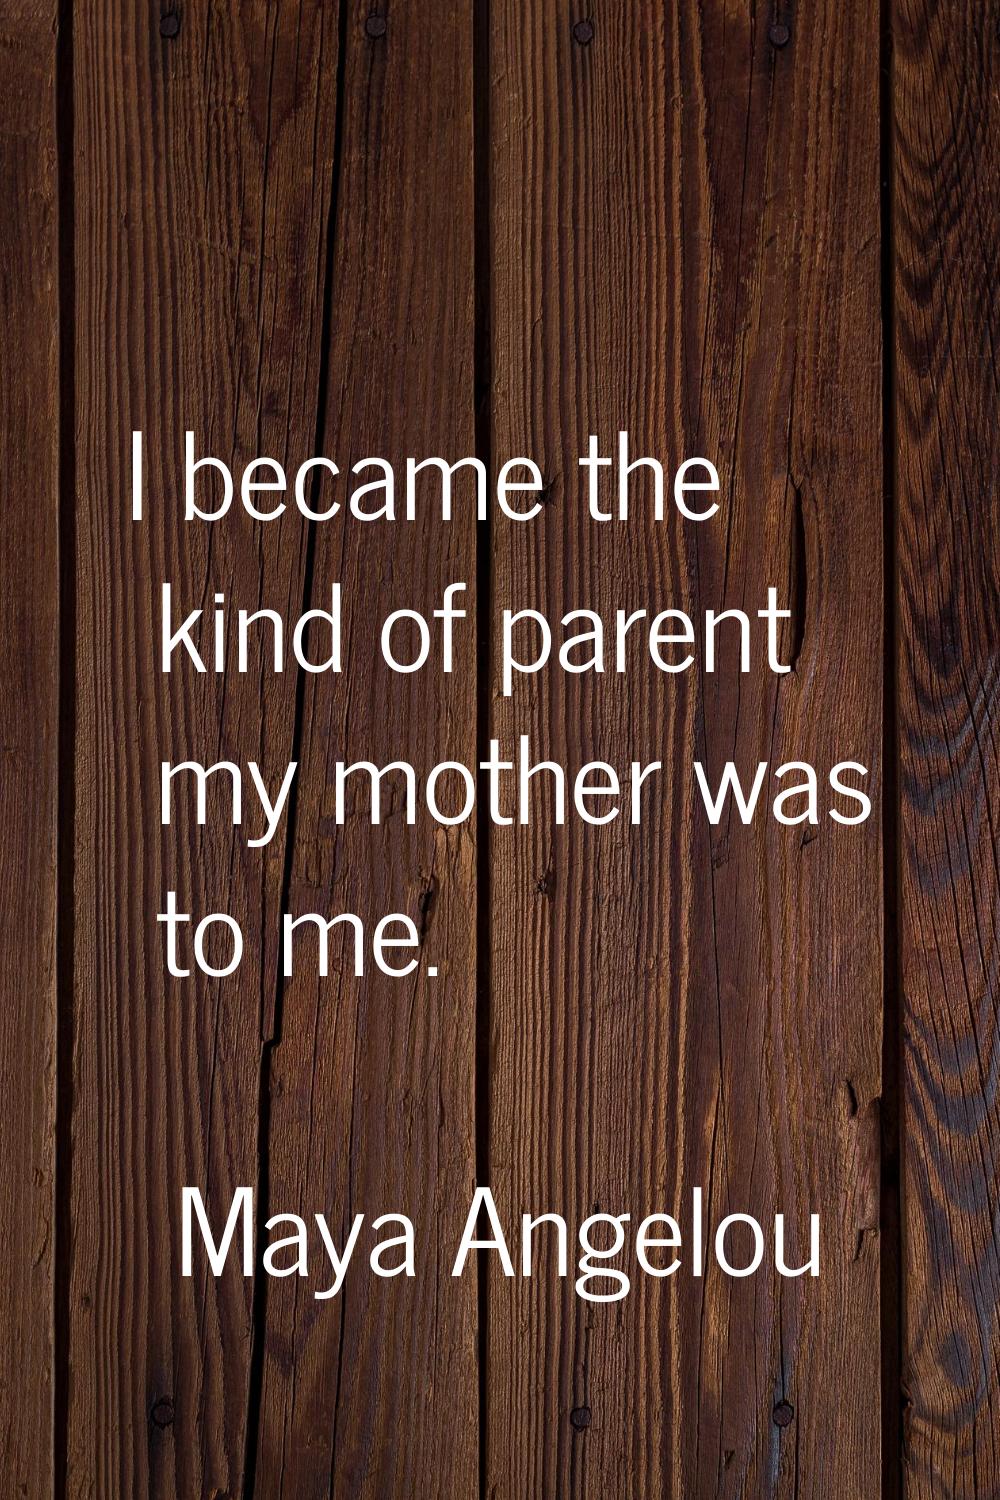 I became the kind of parent my mother was to me.